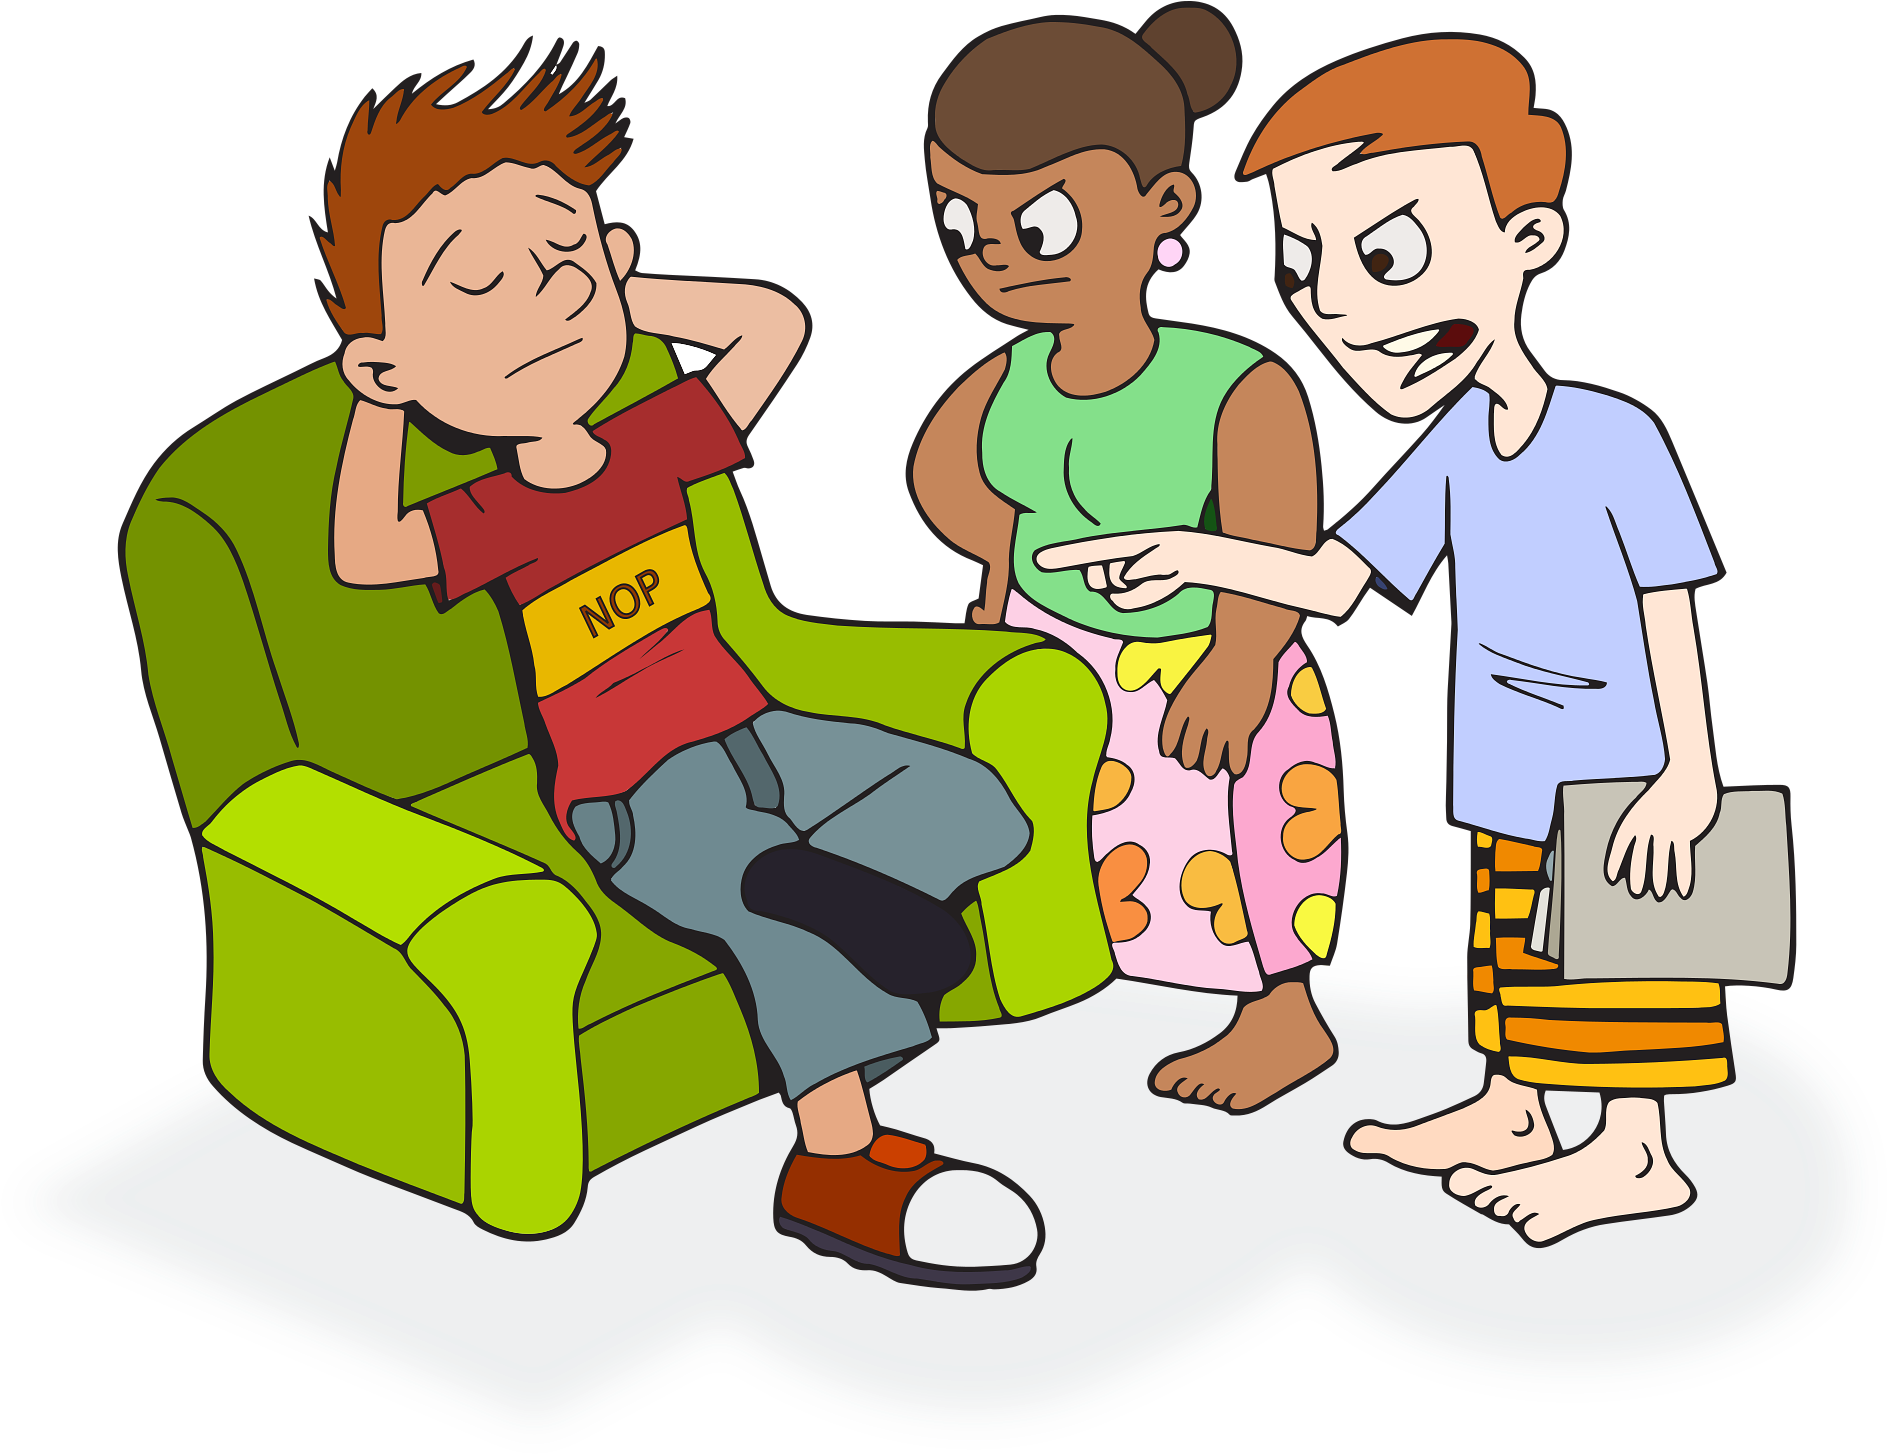 Cartoon Of A Boy Sitting On A Green Chair With A Group Of People